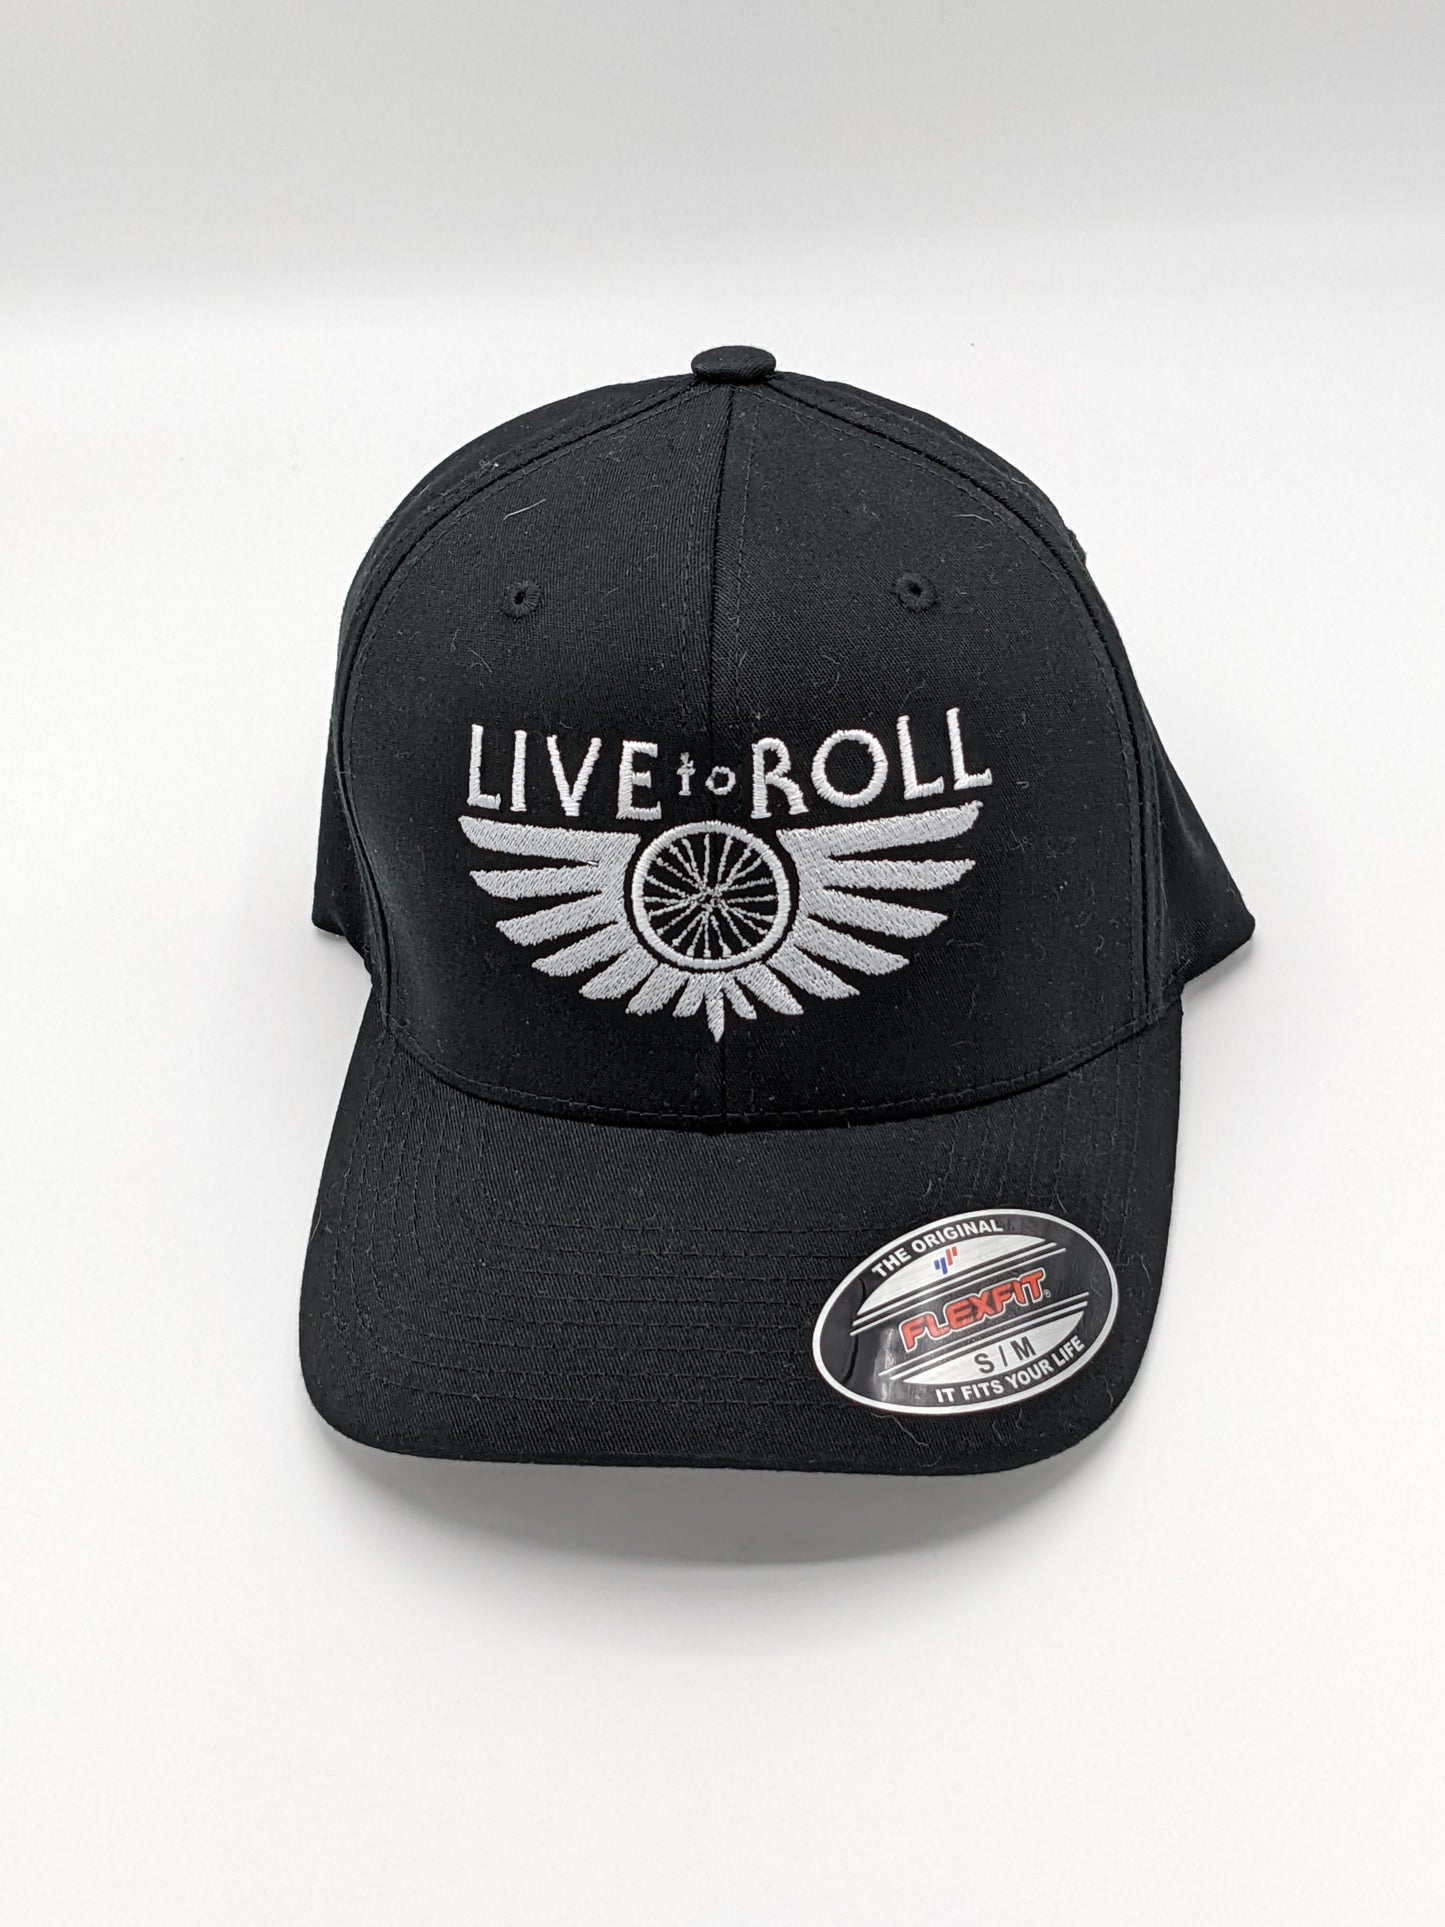 Live To Roll Hats